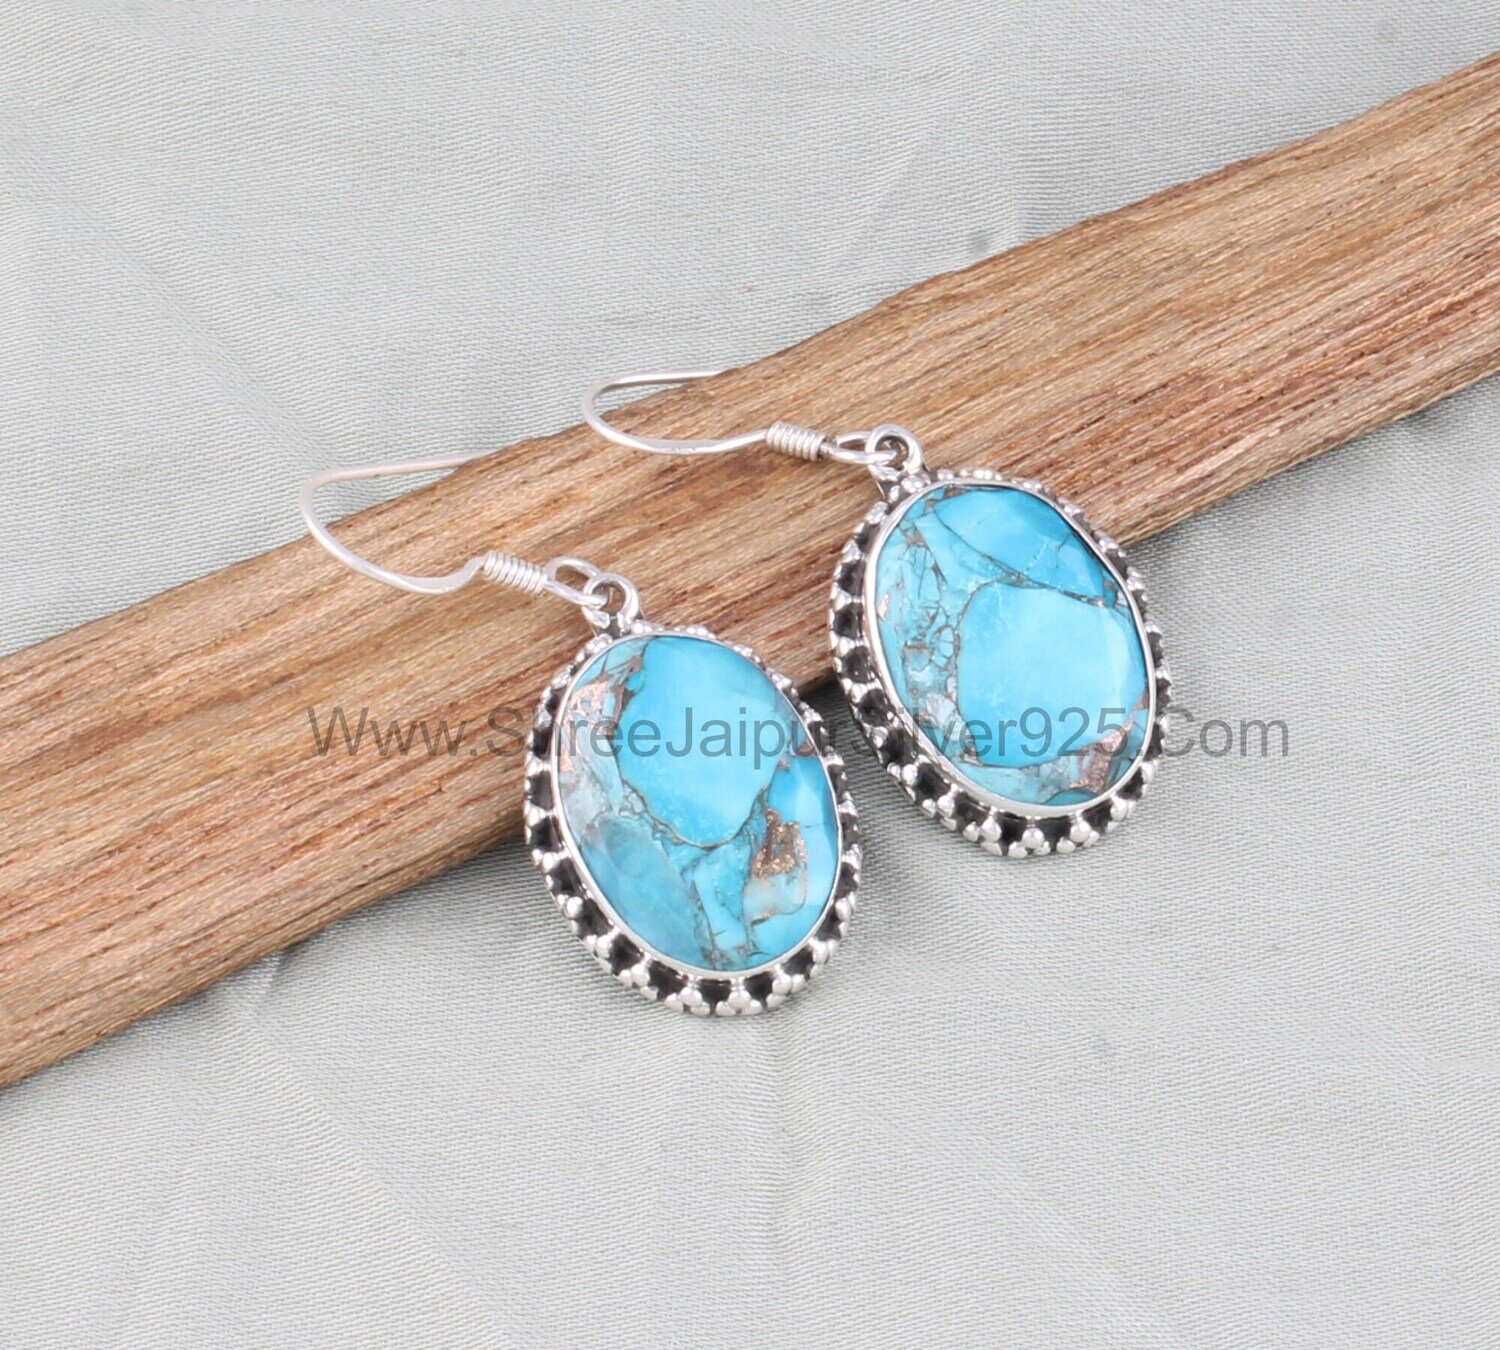 Blue Copper Turquoise Oval Shape Gemstone Solid 925 Sterling Silver Earrings For Women, Handmade Silver Earring For Wedding Anniversary Gift